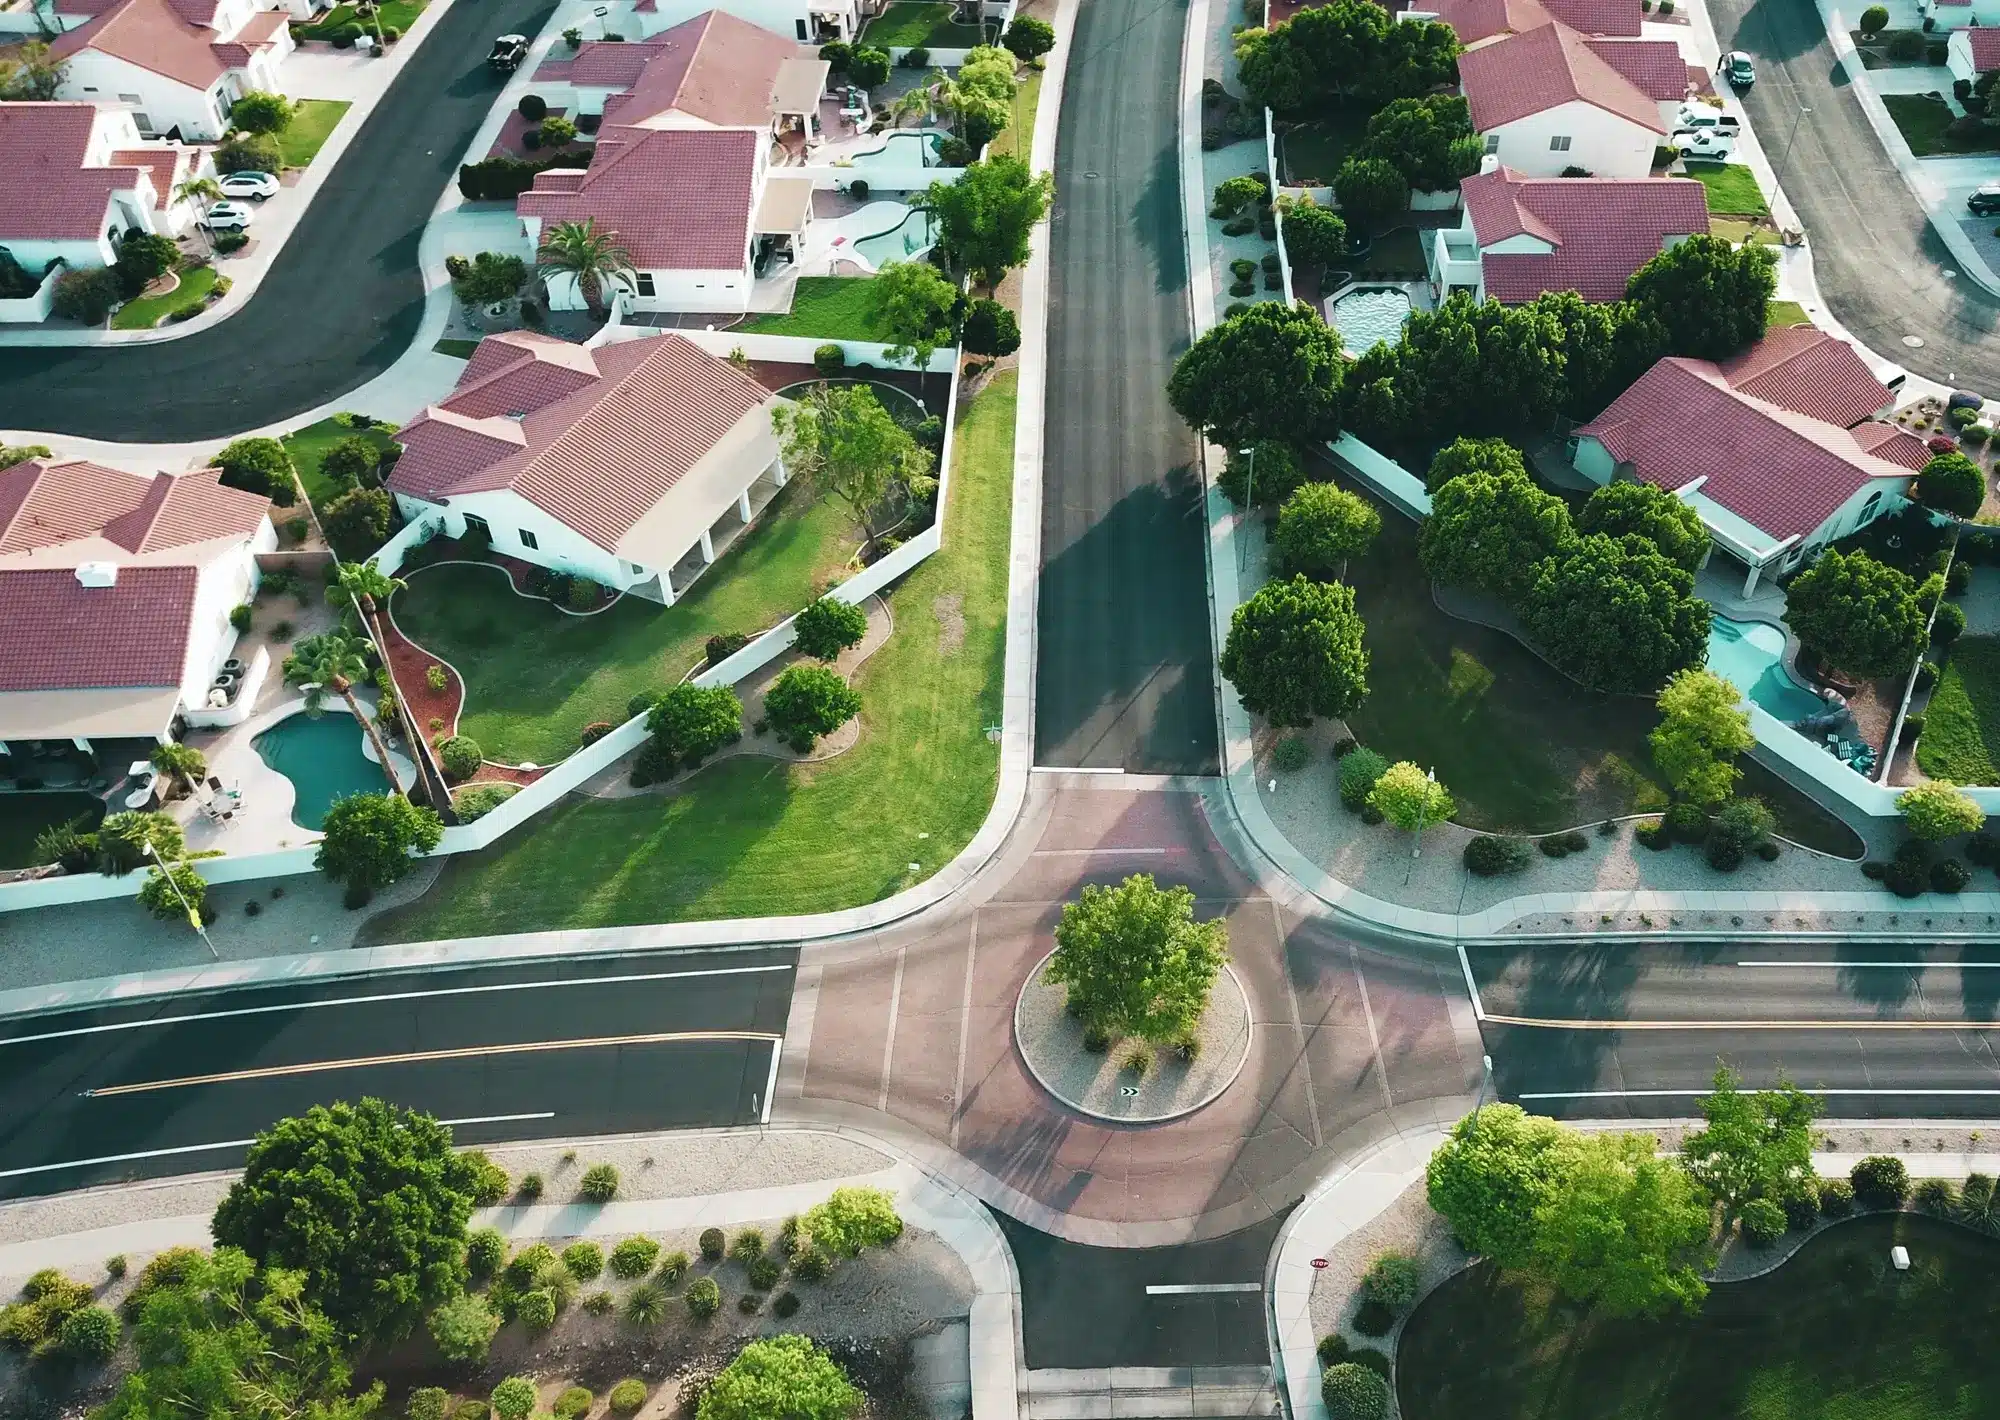 An eagle's eyeview of a roundabout within a suburb, representing the concept of testamentary trust.